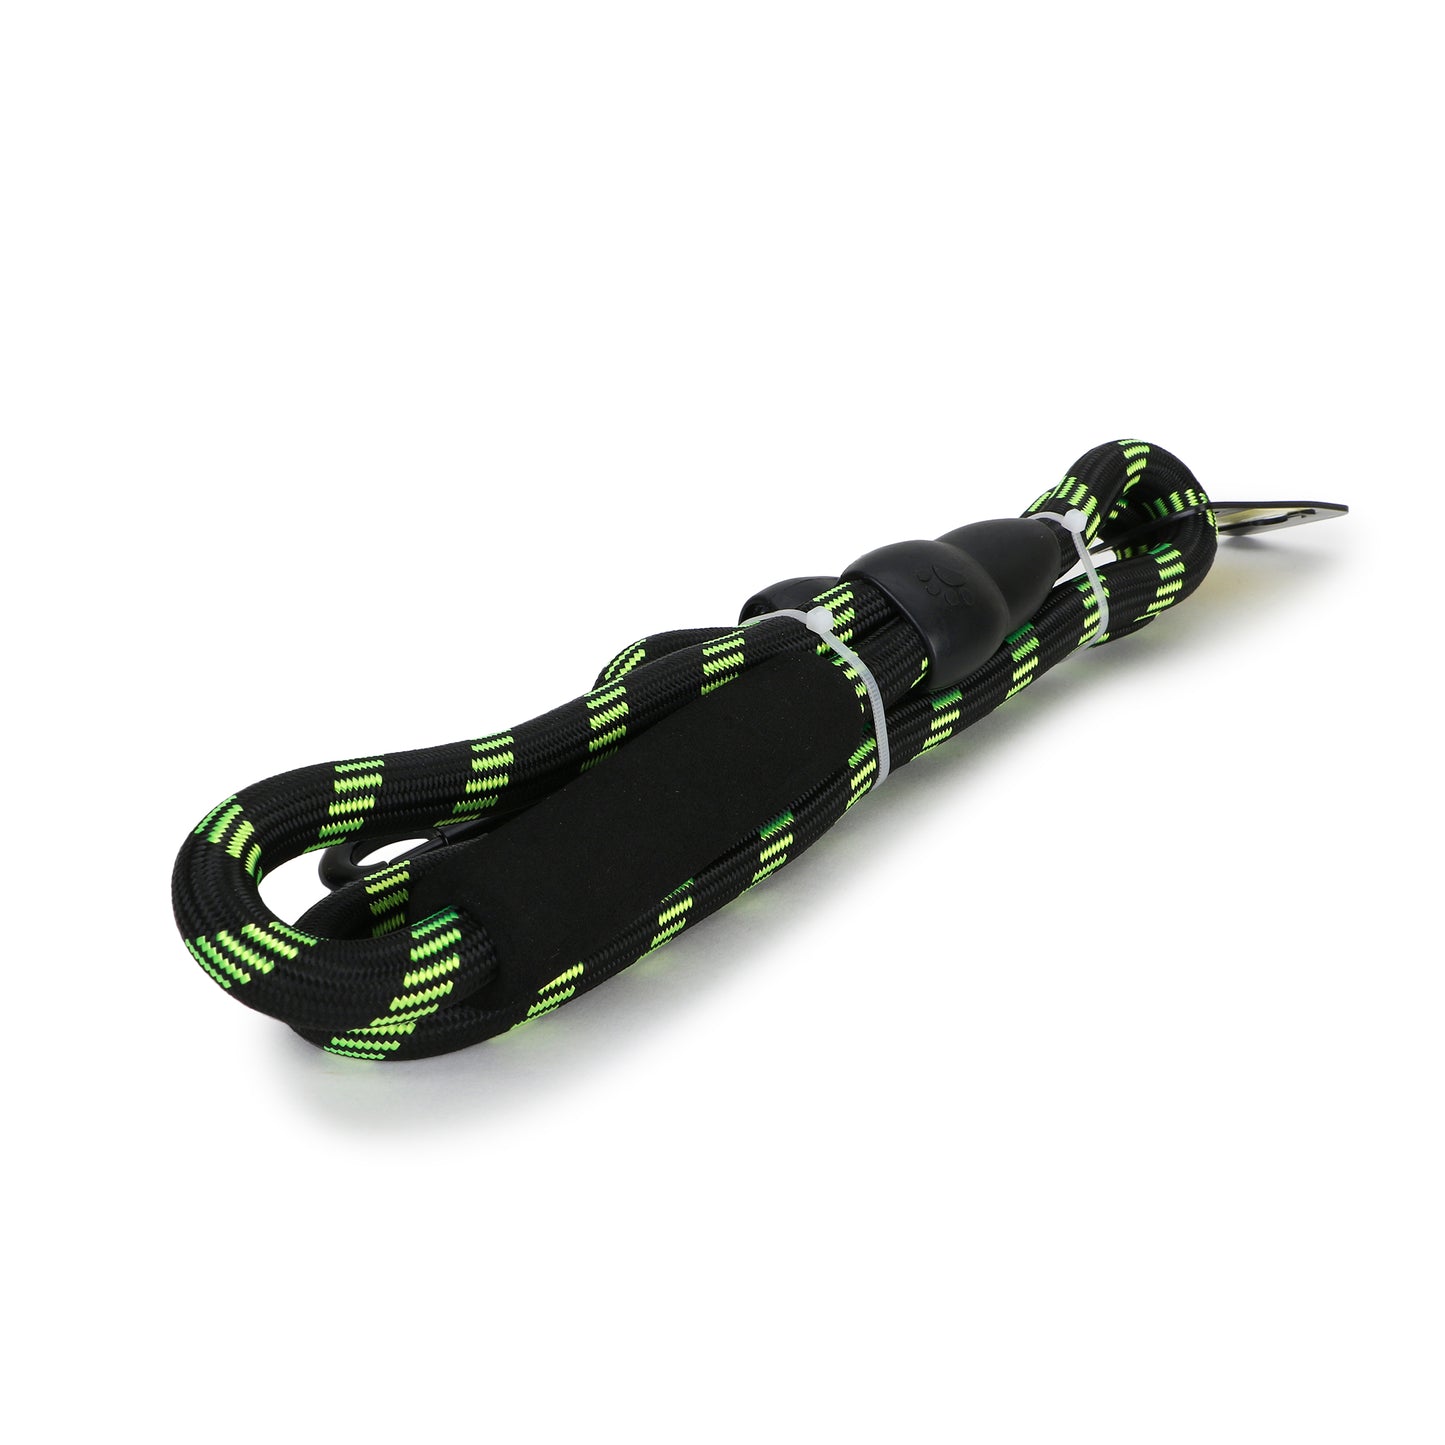 BASIL Rope Leash for Dogs & Puppies, 4 Feet (Black & Green)